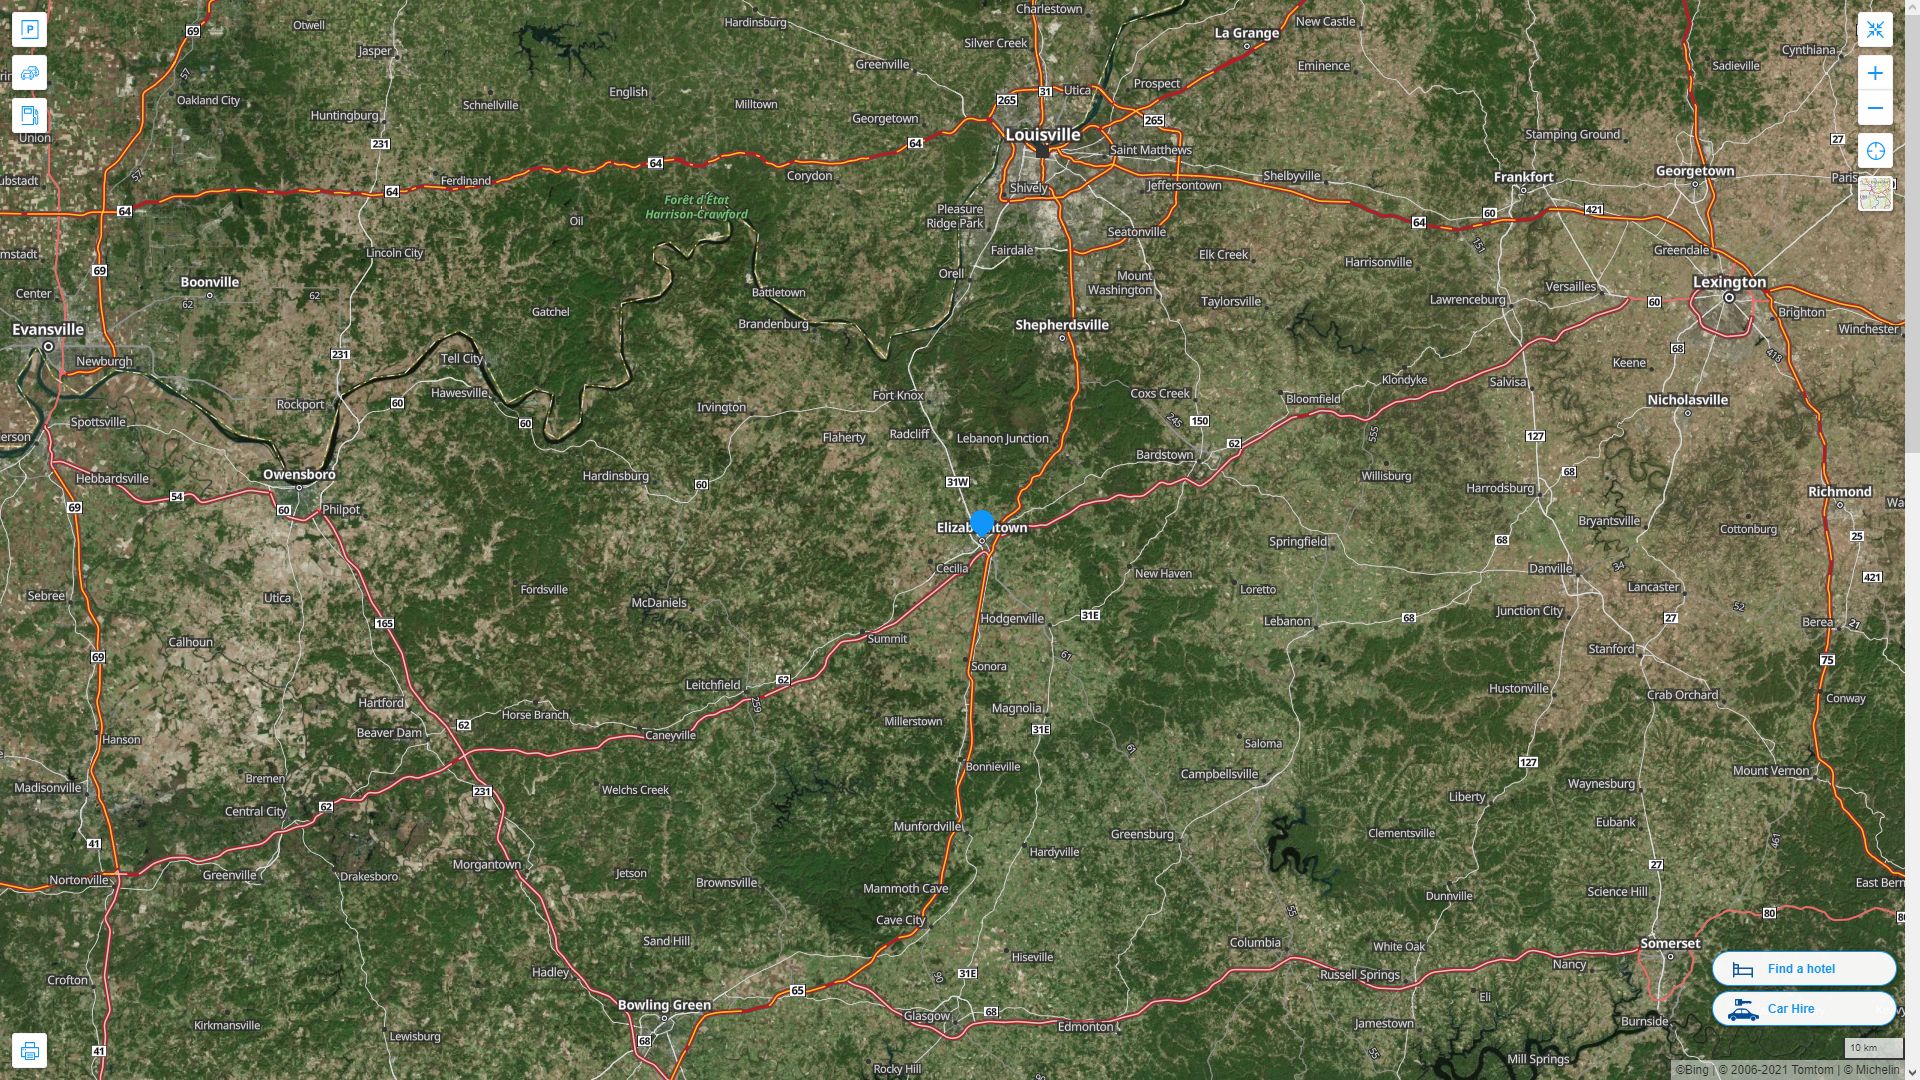 Elizabethtown Kentucky Highway and Road Map with Satellite View